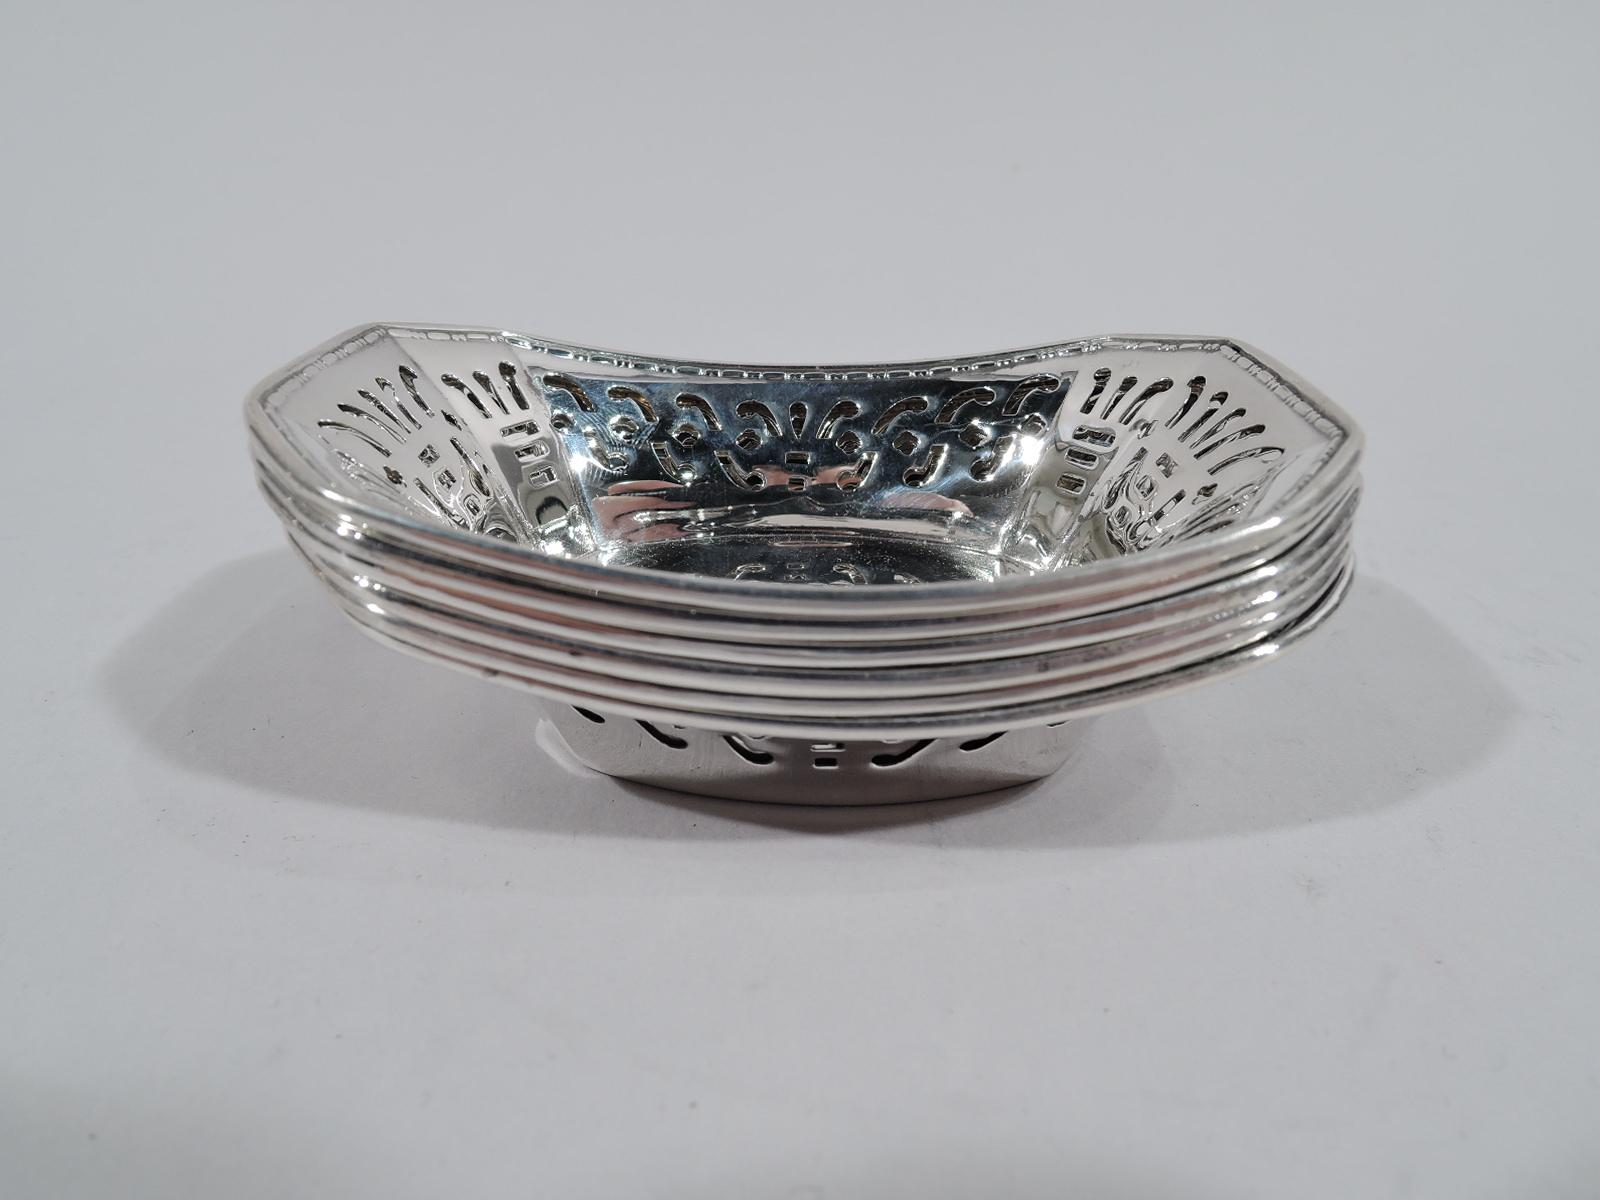 Set of 6 Art Deco sterling silver nut dishes. Made by Webster in Attleboro, Mass, circa 1920. Each: Rectilinear with chamfered corners and tapering sides. Bead-and-reel rim. Pierced geometric ornament. Fully marked. Total weight: 2.5 troy ounces.